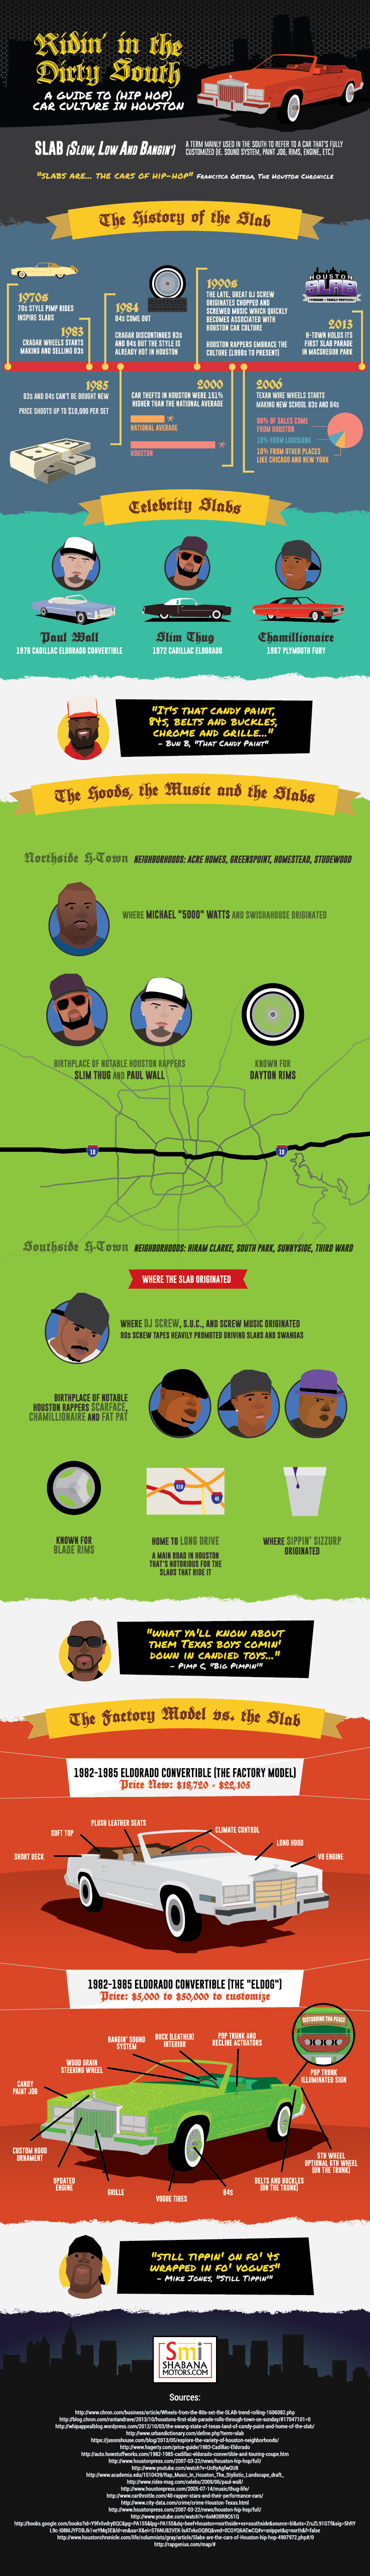 Riding Dirty in the South   Infographic   Final